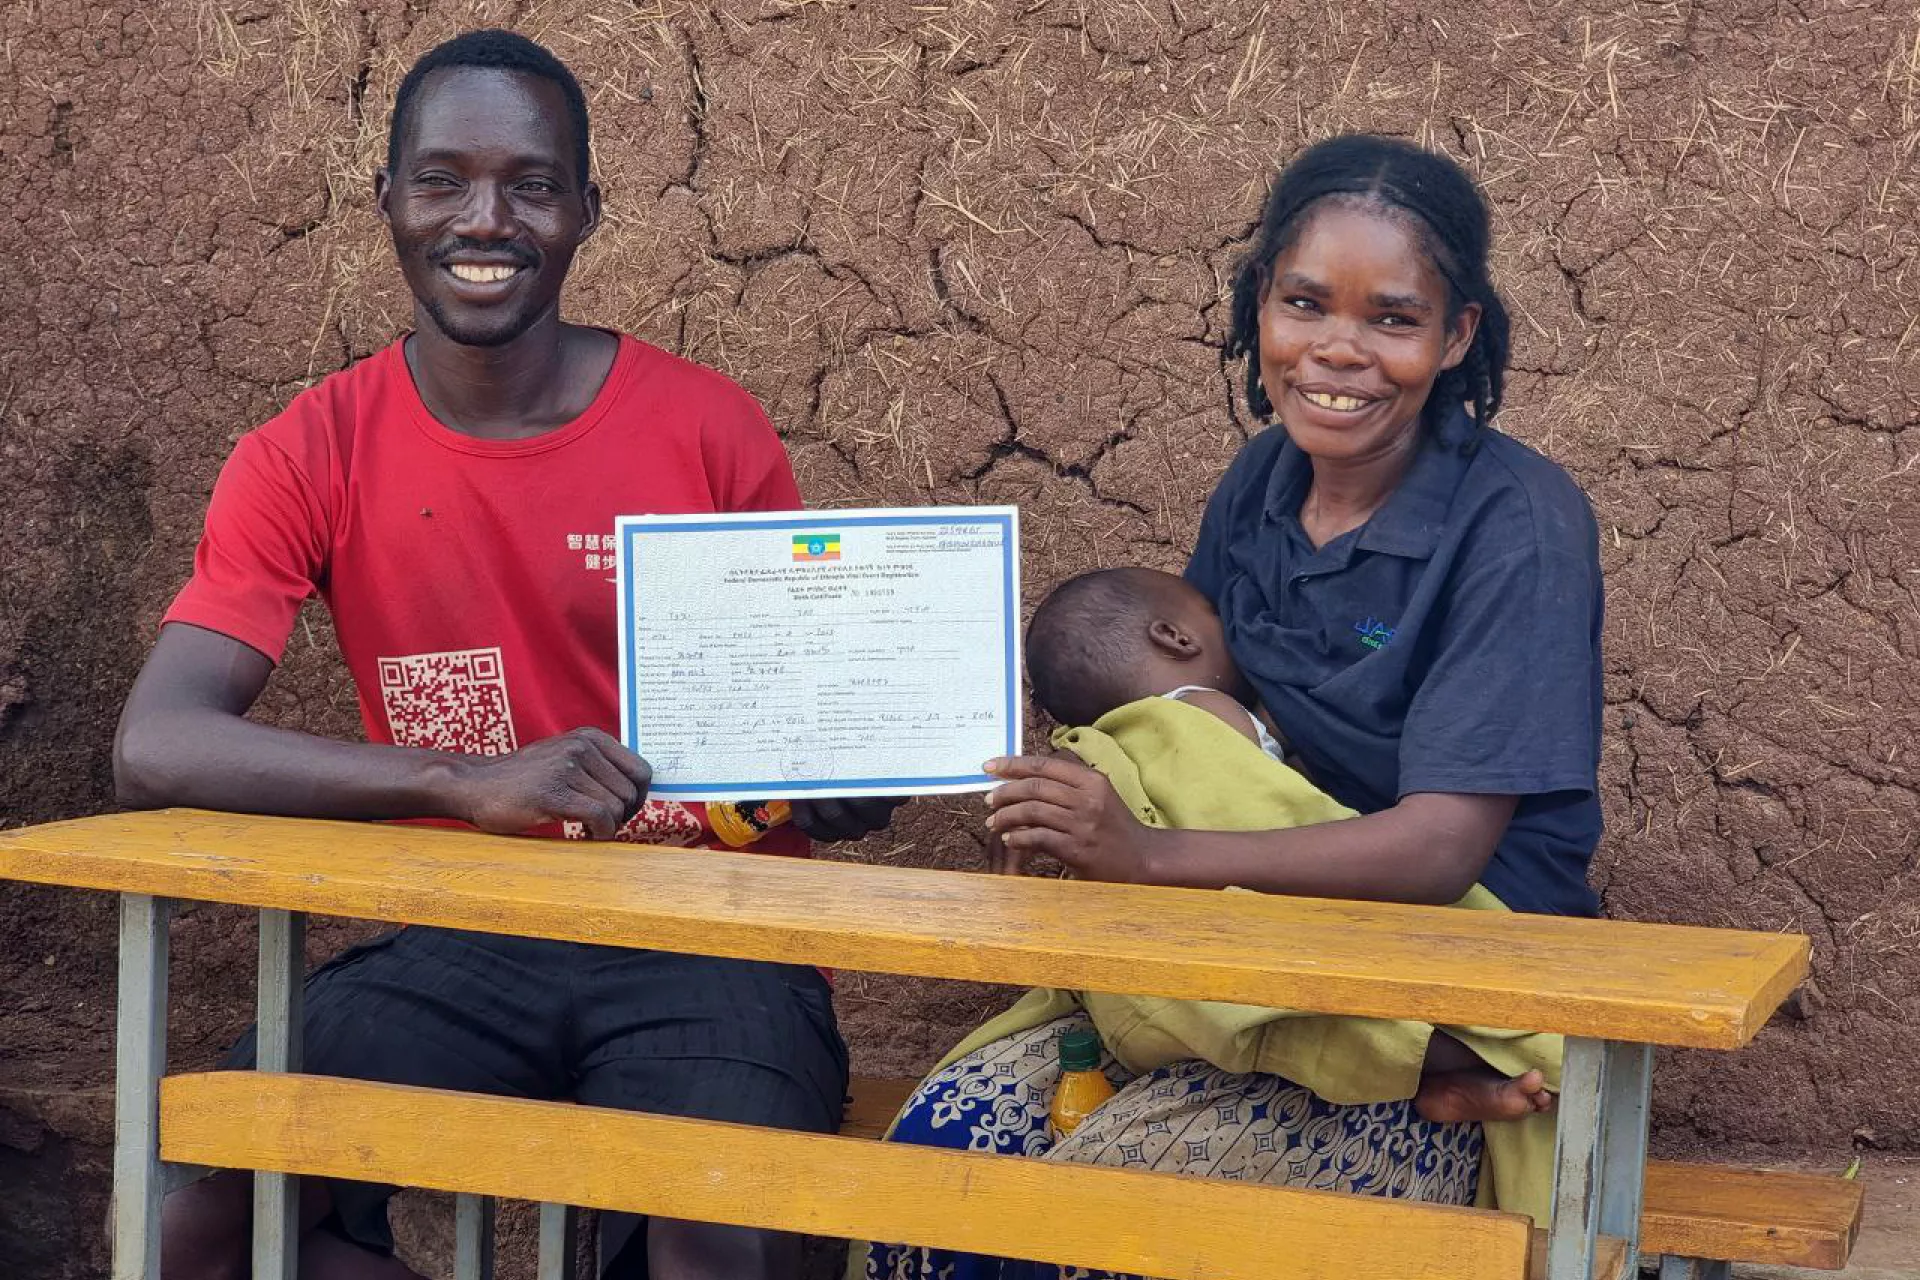 A man and women holding her baby and sitting together and holding a birth certification